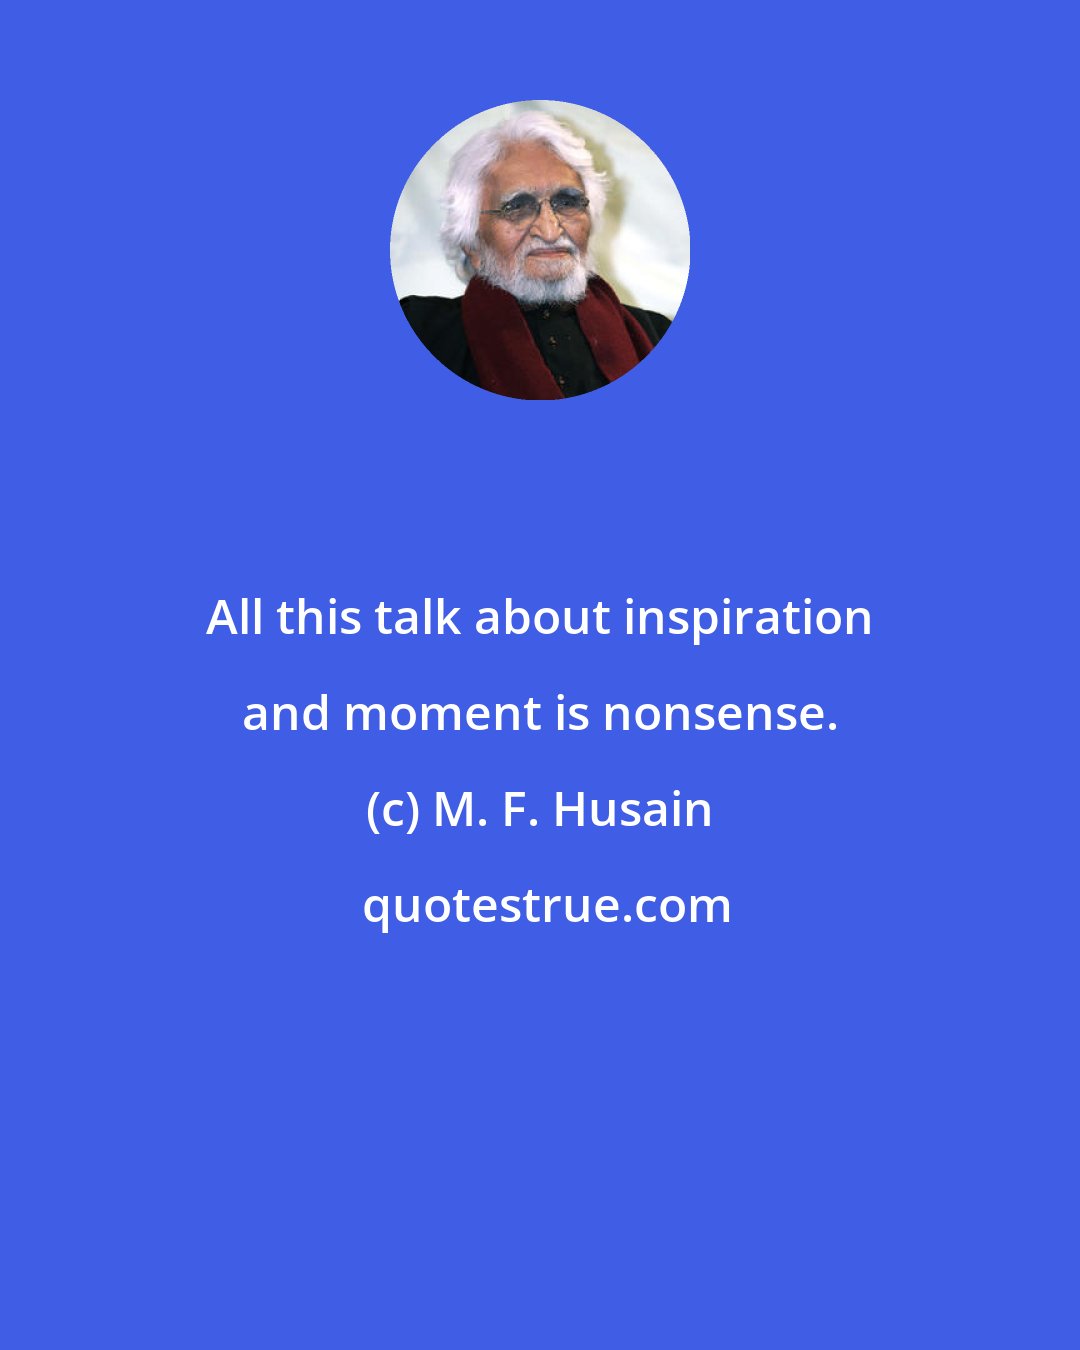 M. F. Husain: All this talk about inspiration and moment is nonsense.